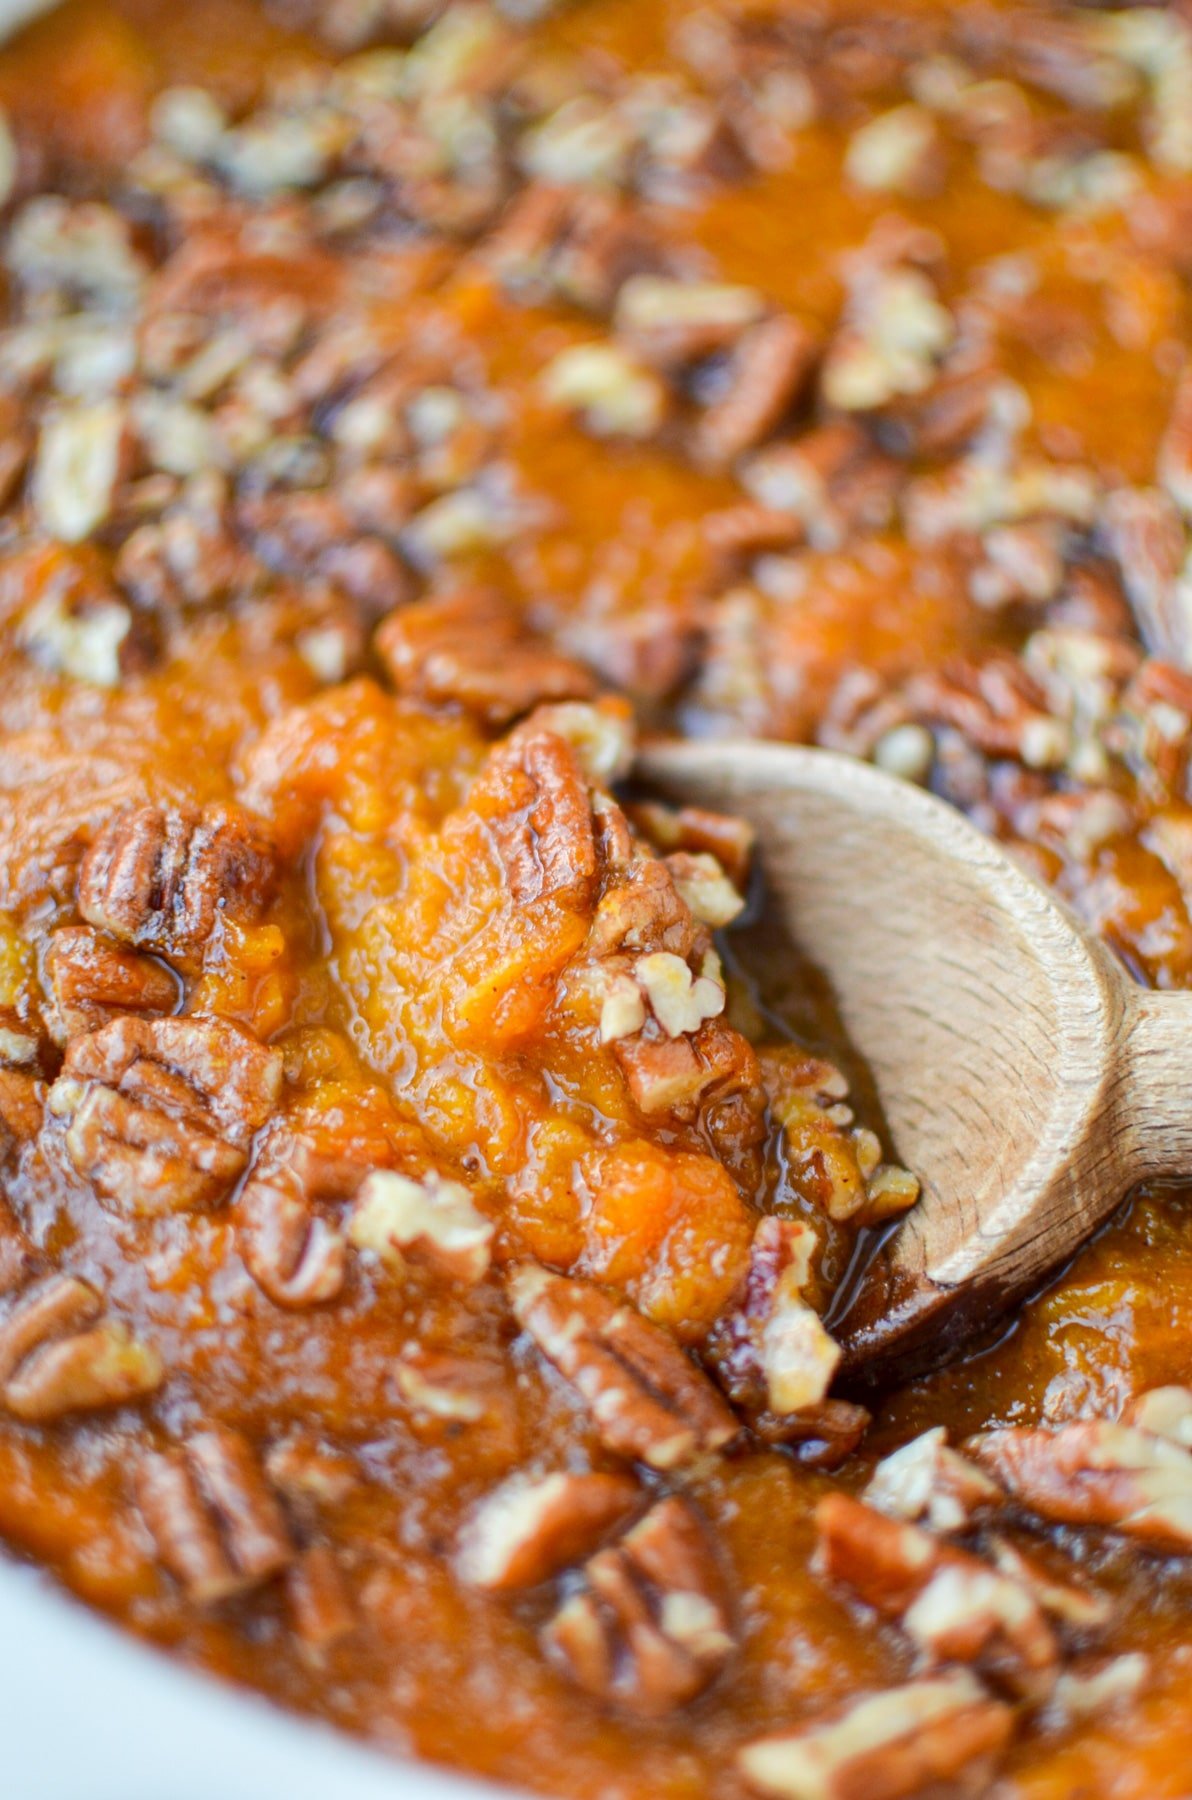 A wooden spoon scooping out a portion of sweet potato casserole with a praline topping.